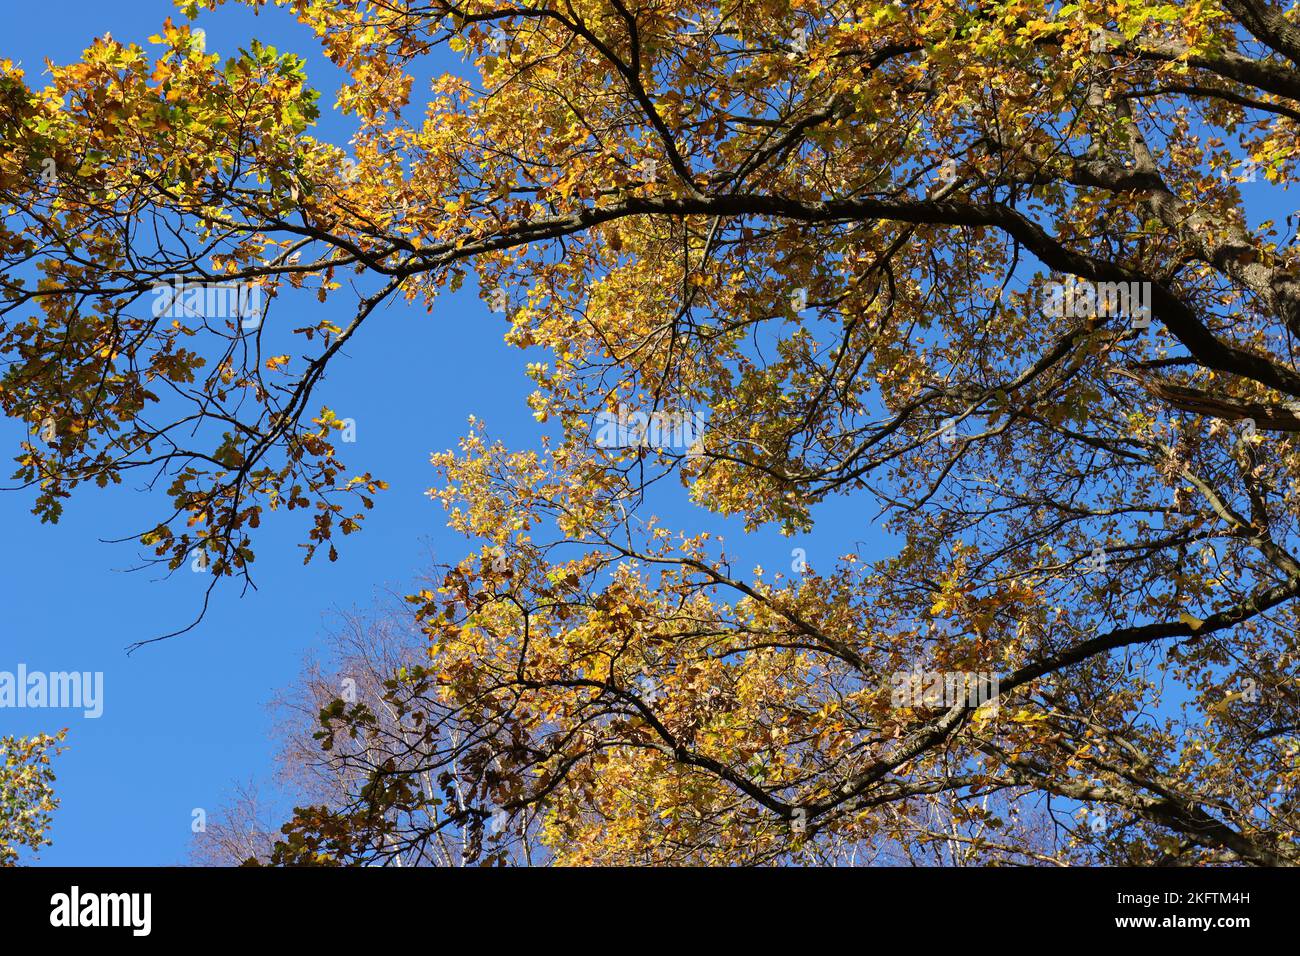 Beautiful branches of an oak tree with golden yellow autumn colour against a blue sky, view from below Stock Photo